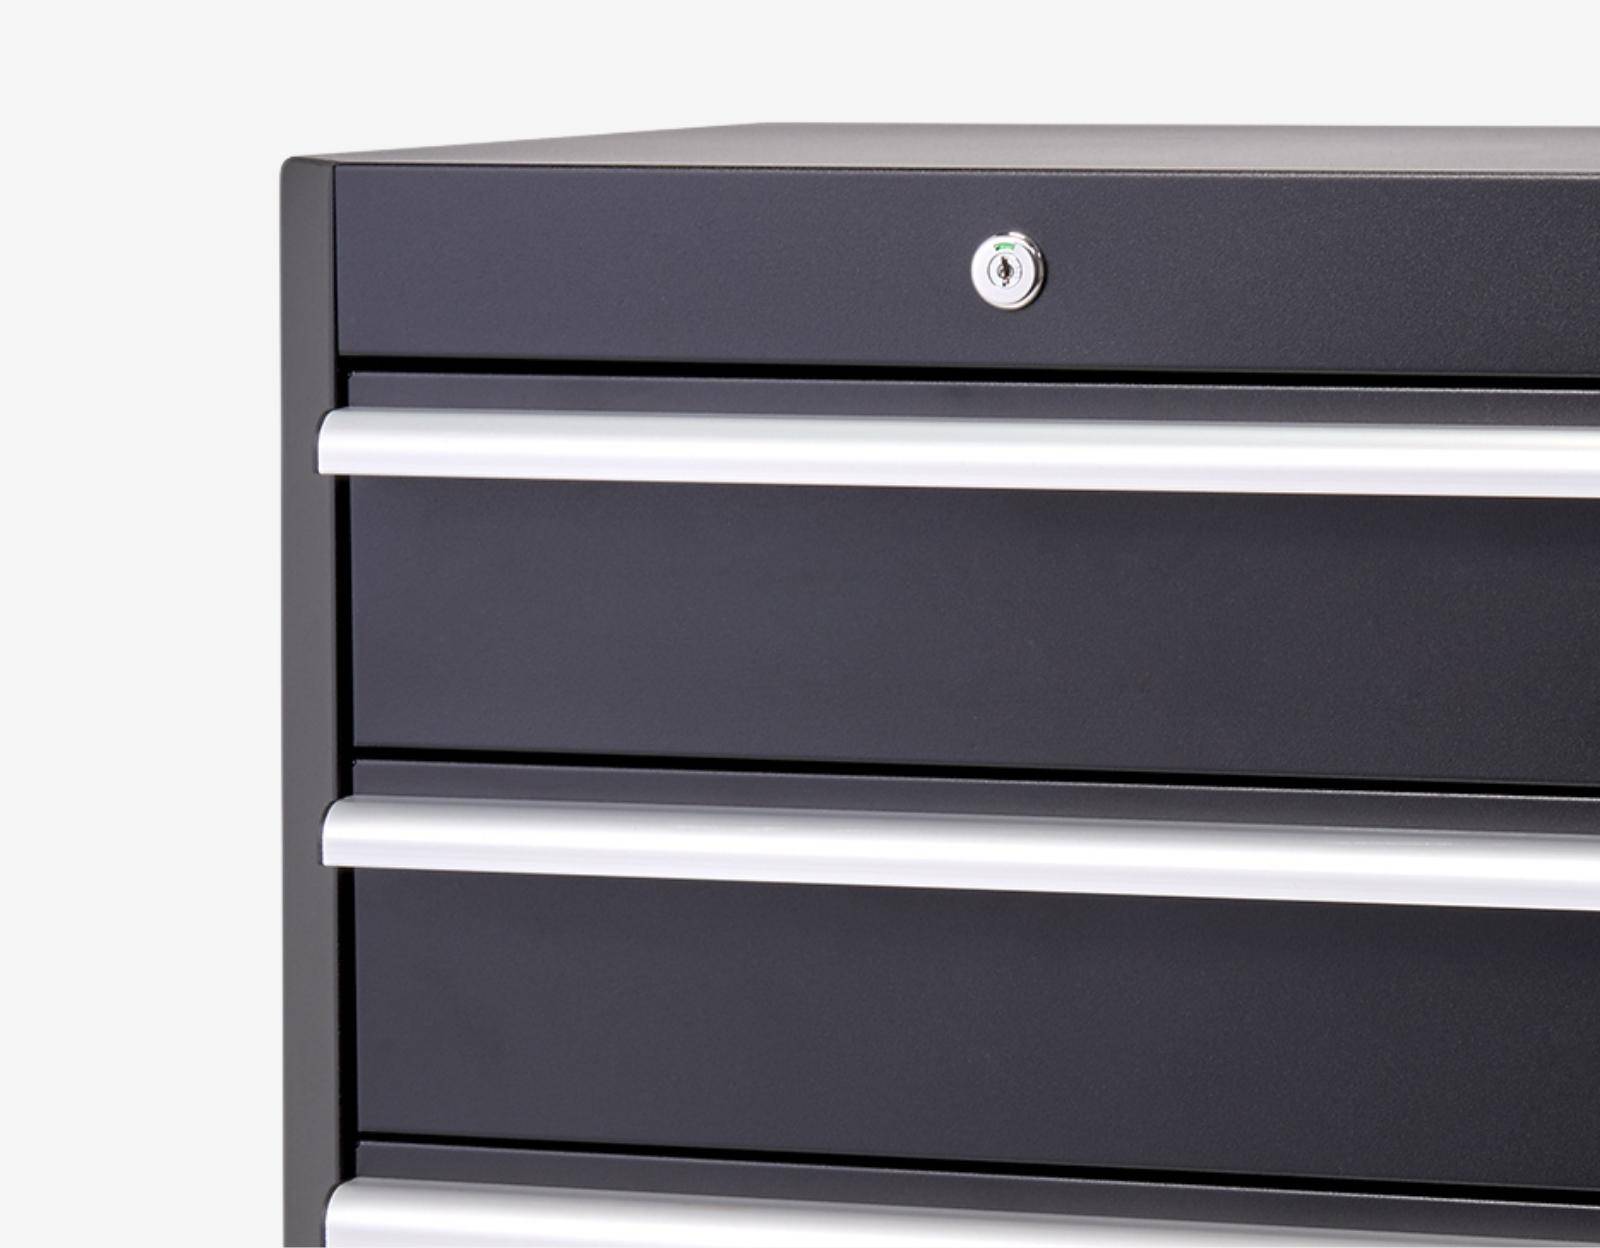 rounded edges of the base cabinet, aluminum drawer handles